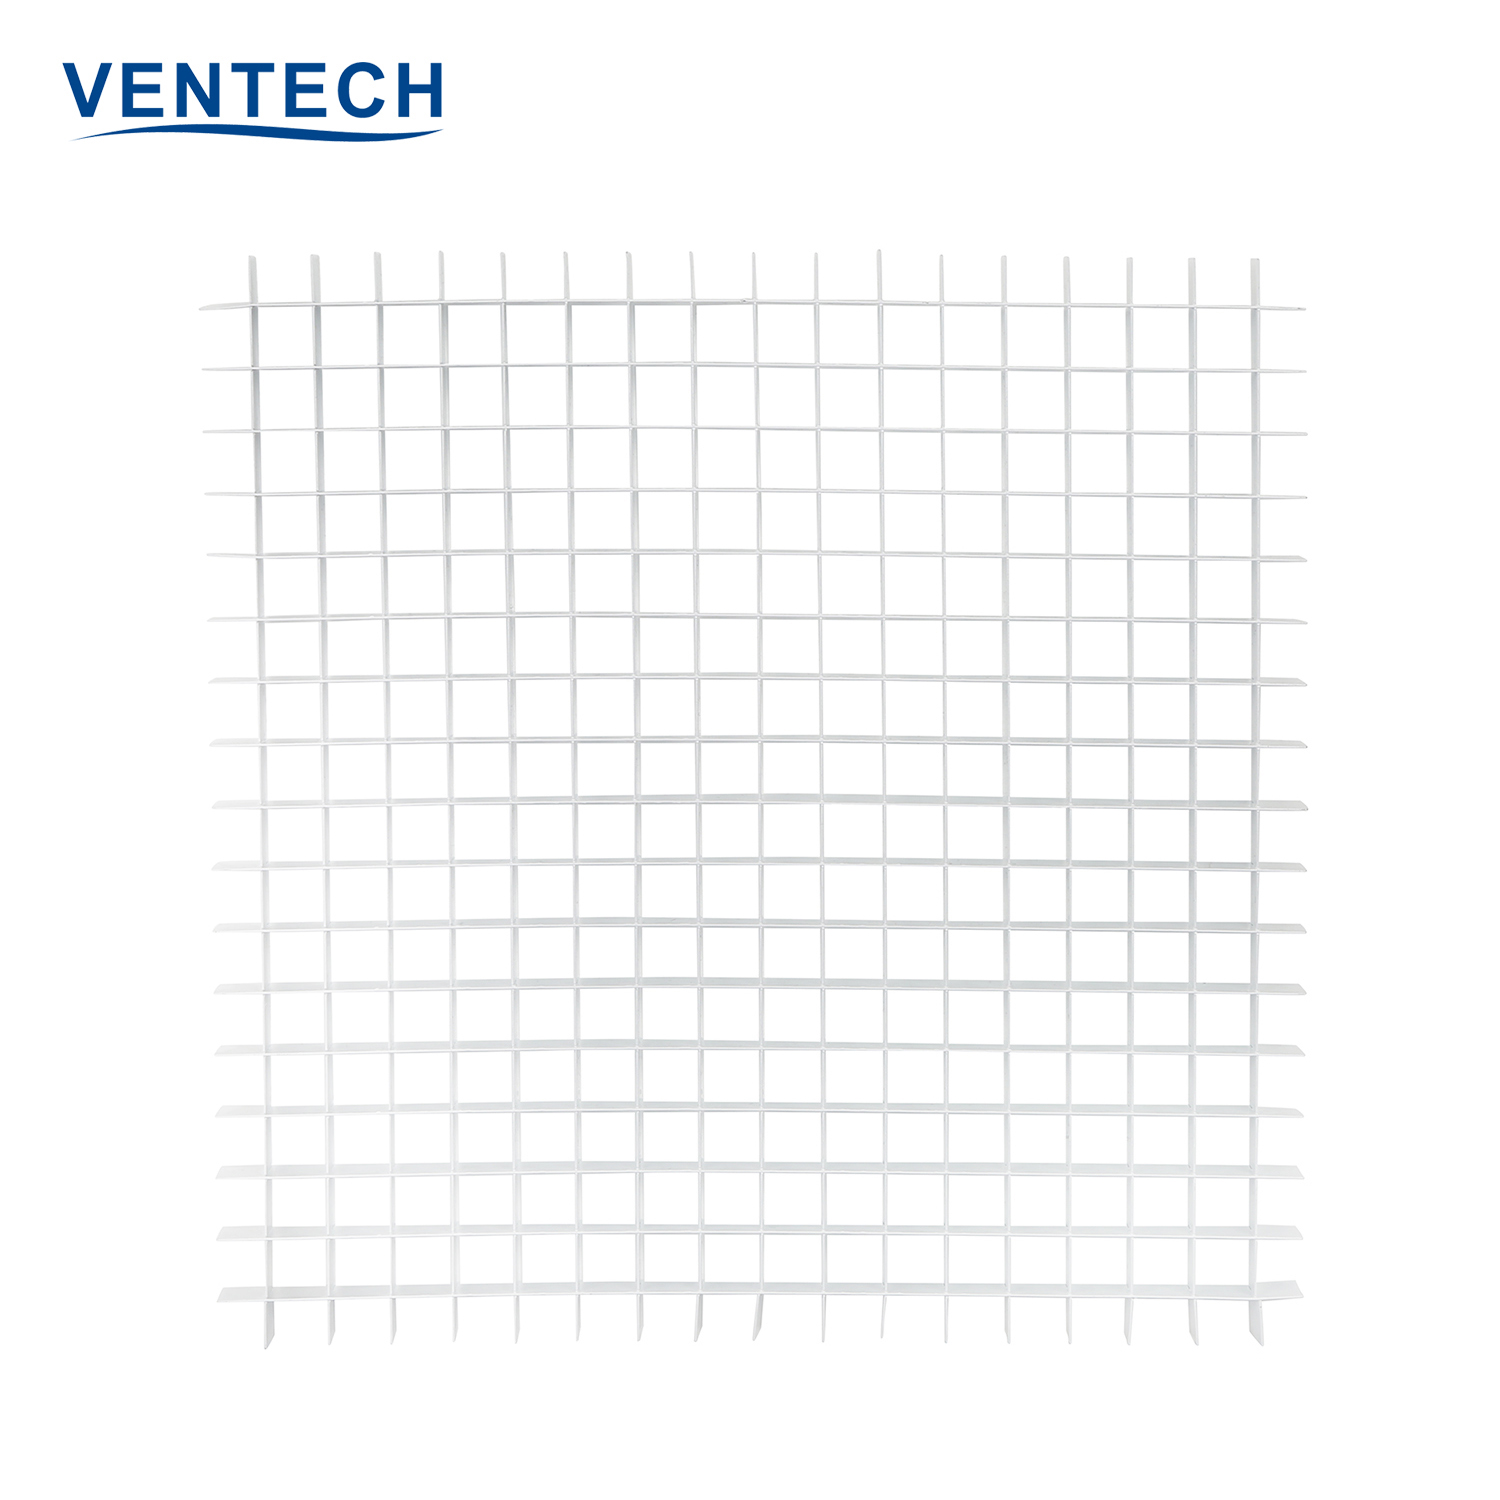 Ventech professional wall registers and grilles inquire now bulk production-1